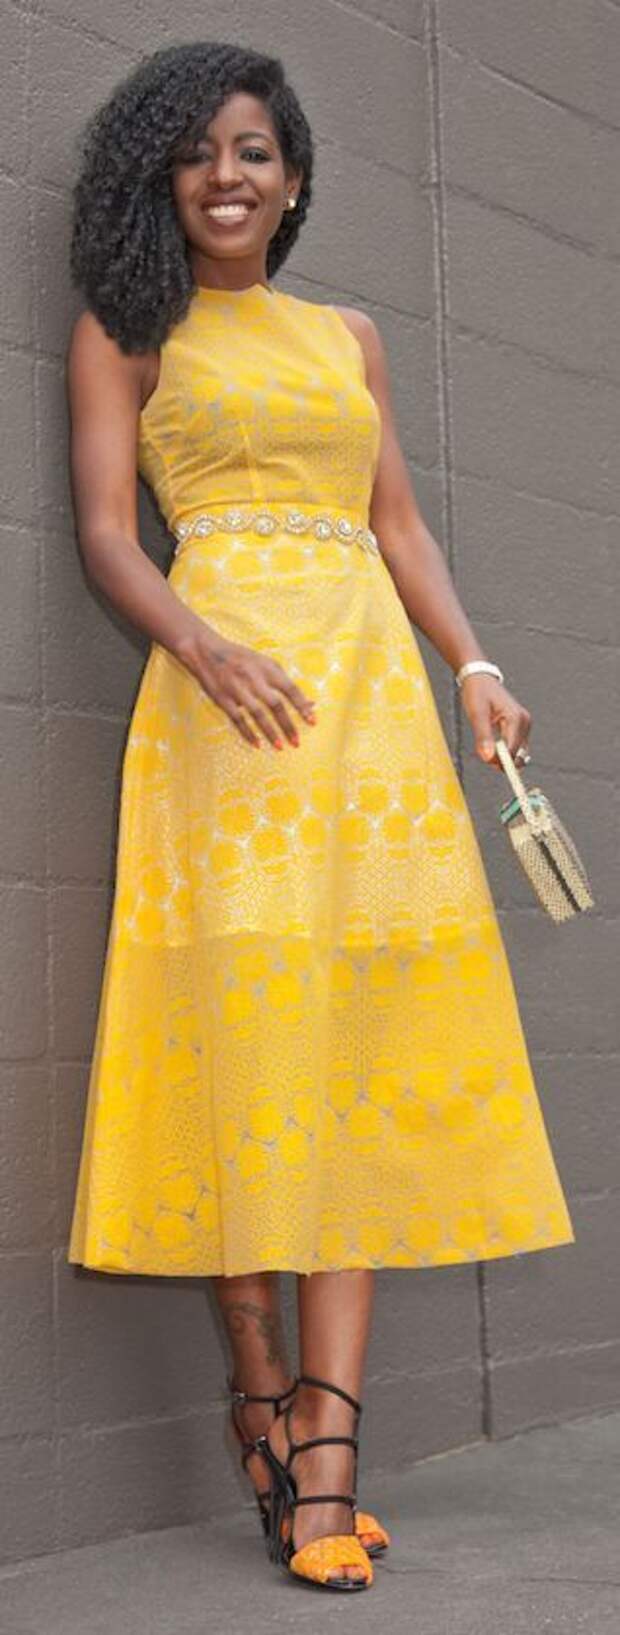 In love with this gorgeous marigold dress. Hello, spring! #liveincolor